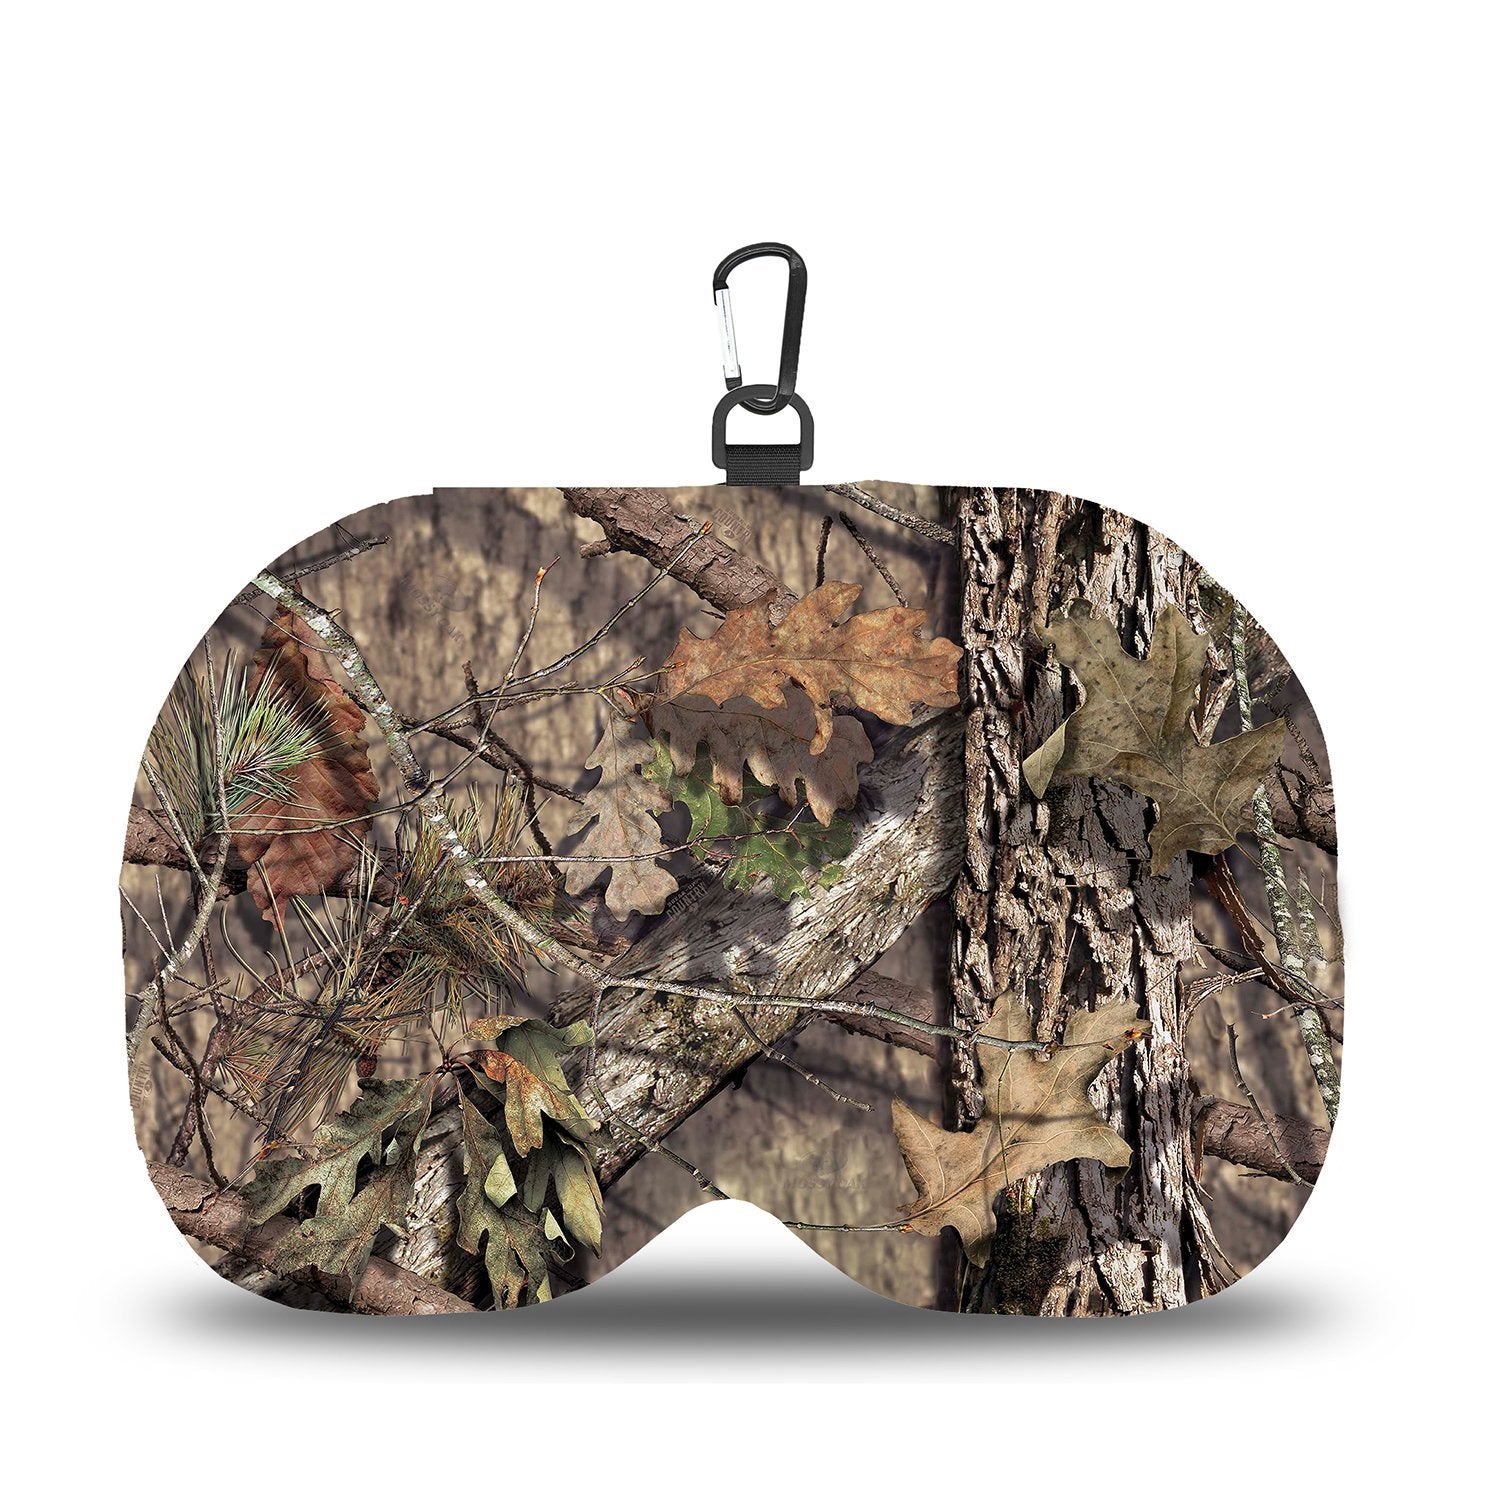 Tail Mate GelCore Outdoor Seat Cushion for Hunting and Fishing, Mossy Oak  Break Up Country